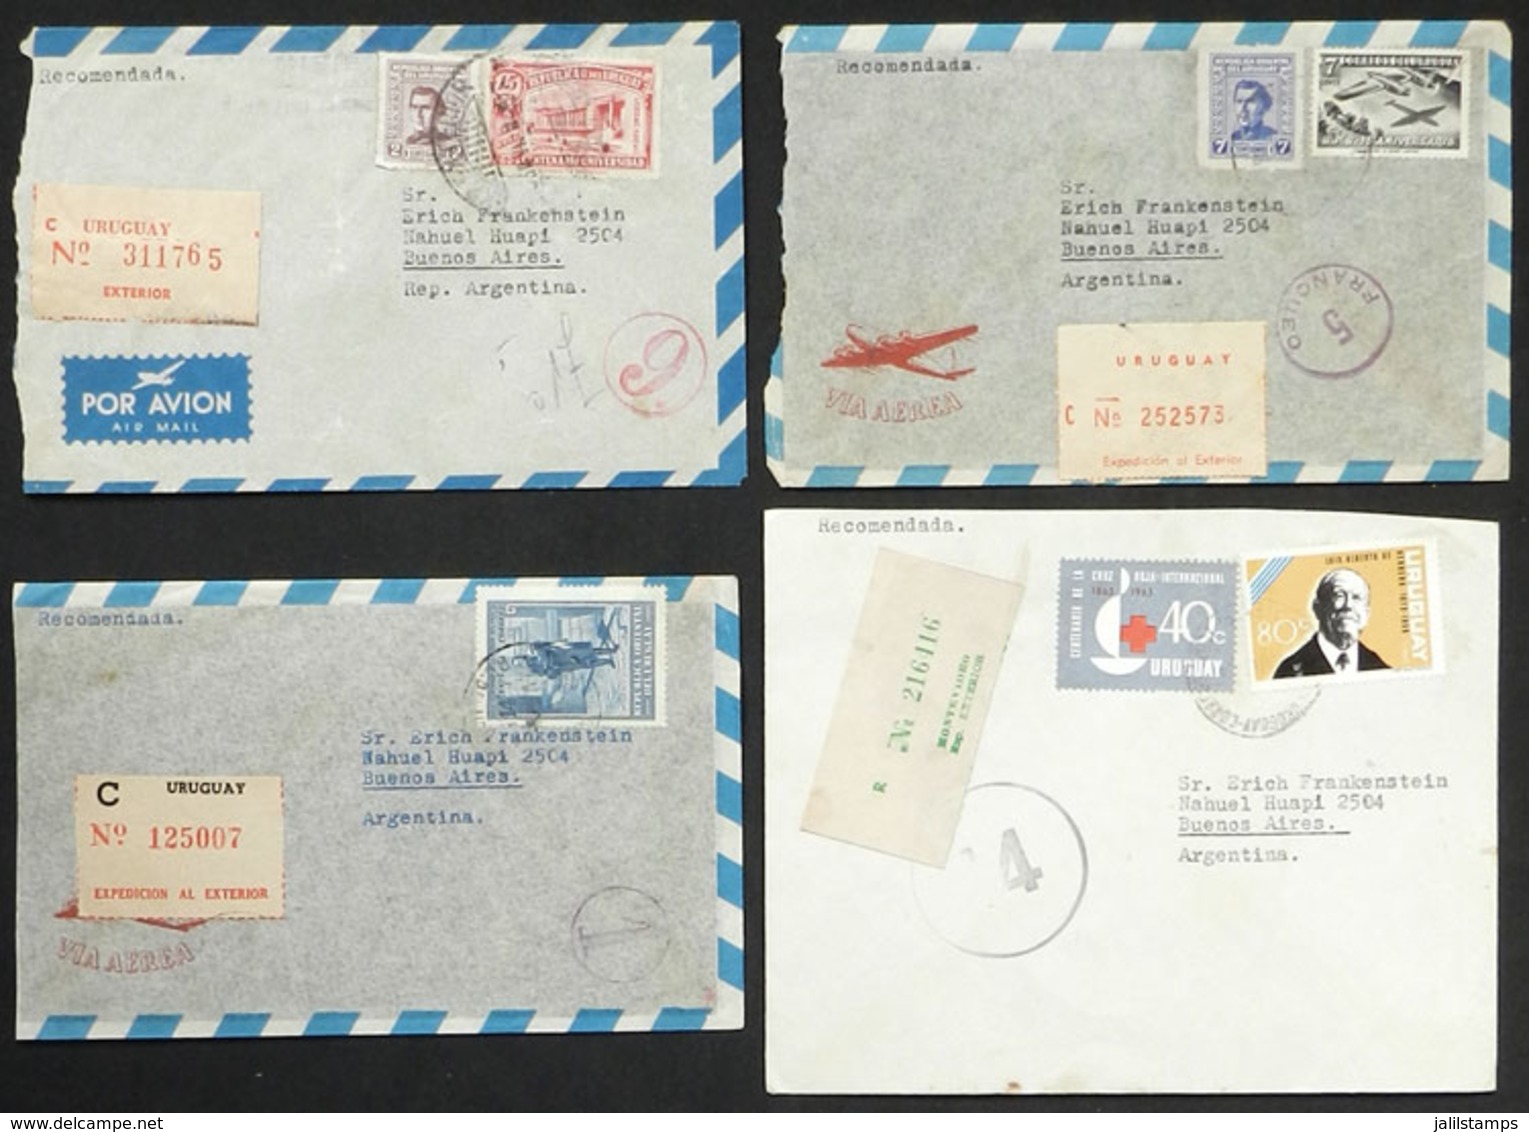 URUGUAY: 63 Covers With Interesting Postages Sent To Argentina, Very Fine General Quality, LOW START. Many Of The Covers - Uruguay